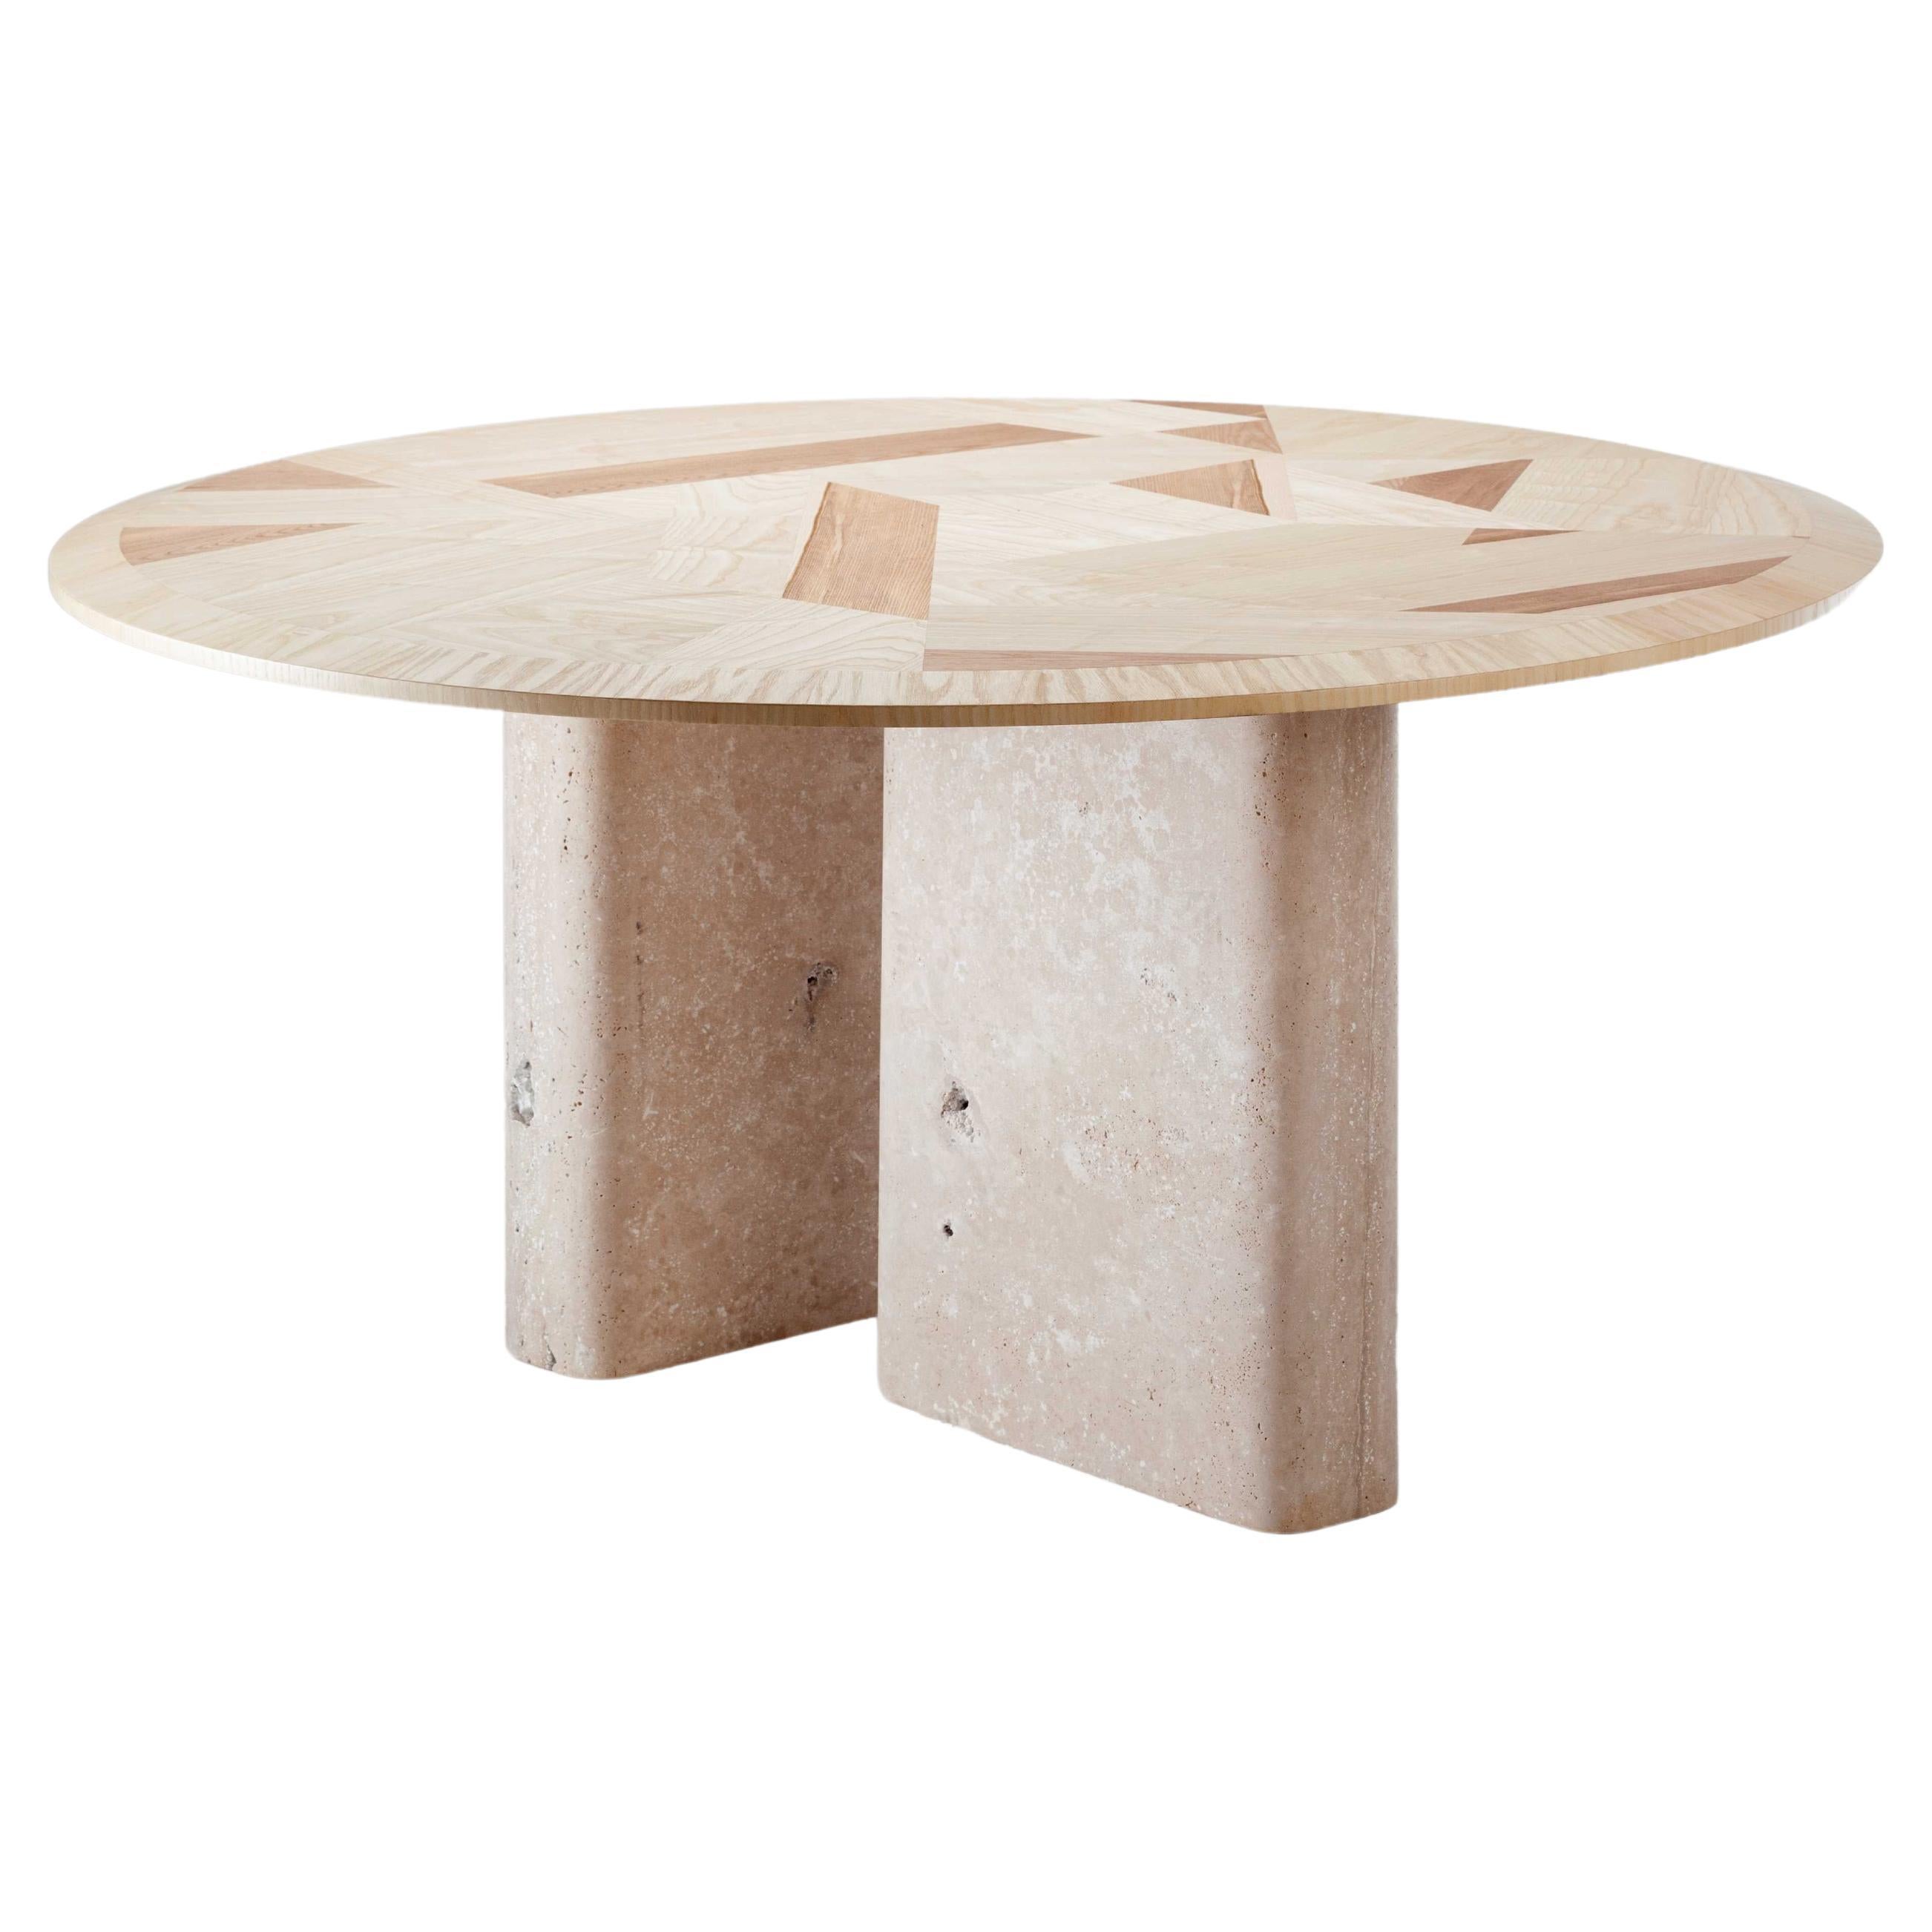 DOOQ Organic Modern Natural Olive Ash and Travertine Dining Table L'anamour, 150 For Sale